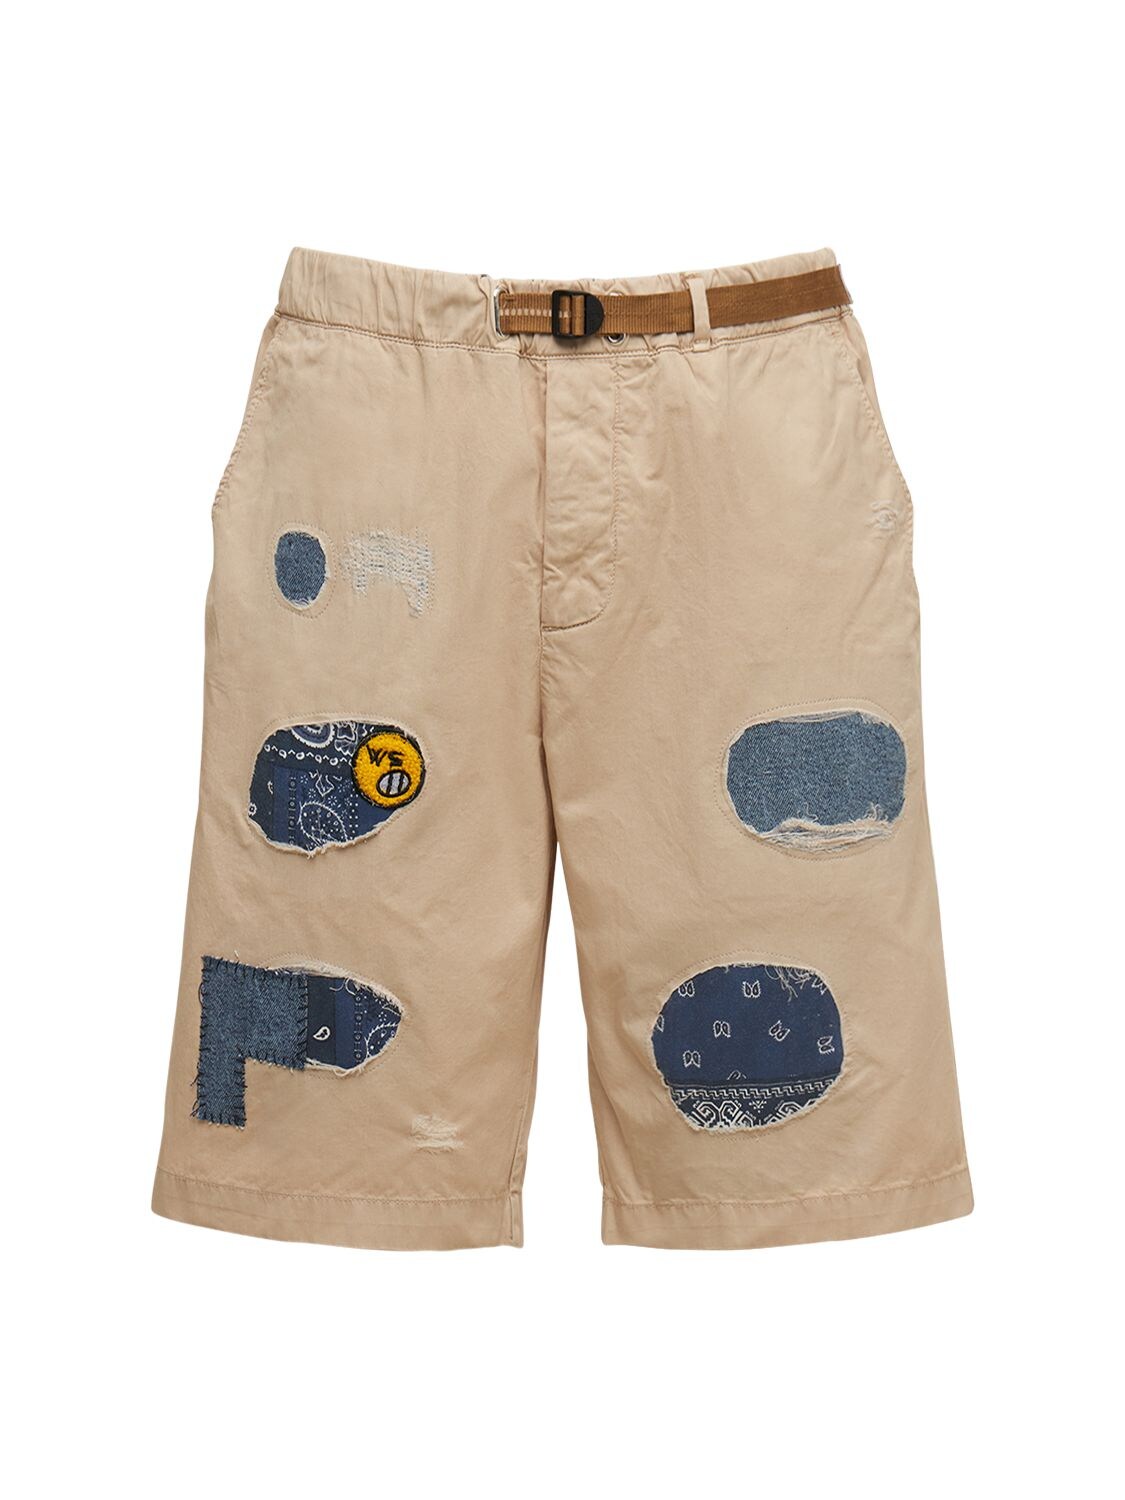 White Sand 88 Distressed Cotton Shorts W/ Patches In 베이지